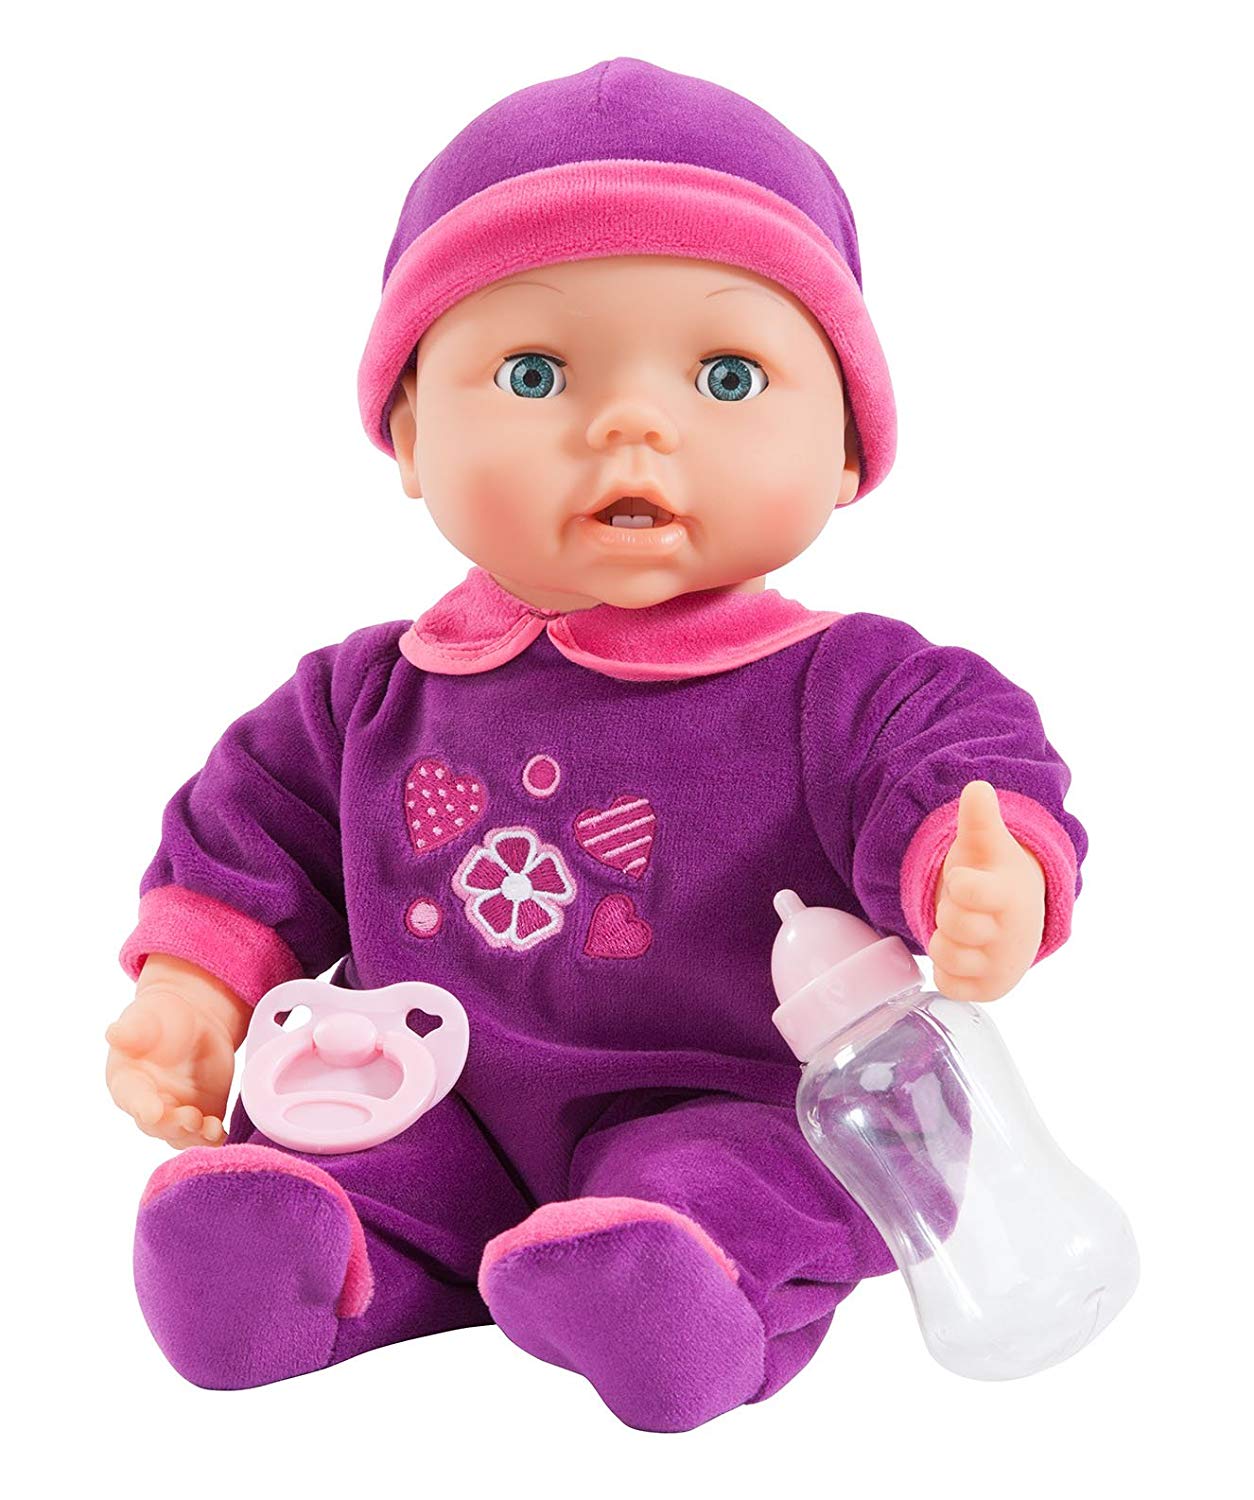 baby grow a tooth doll